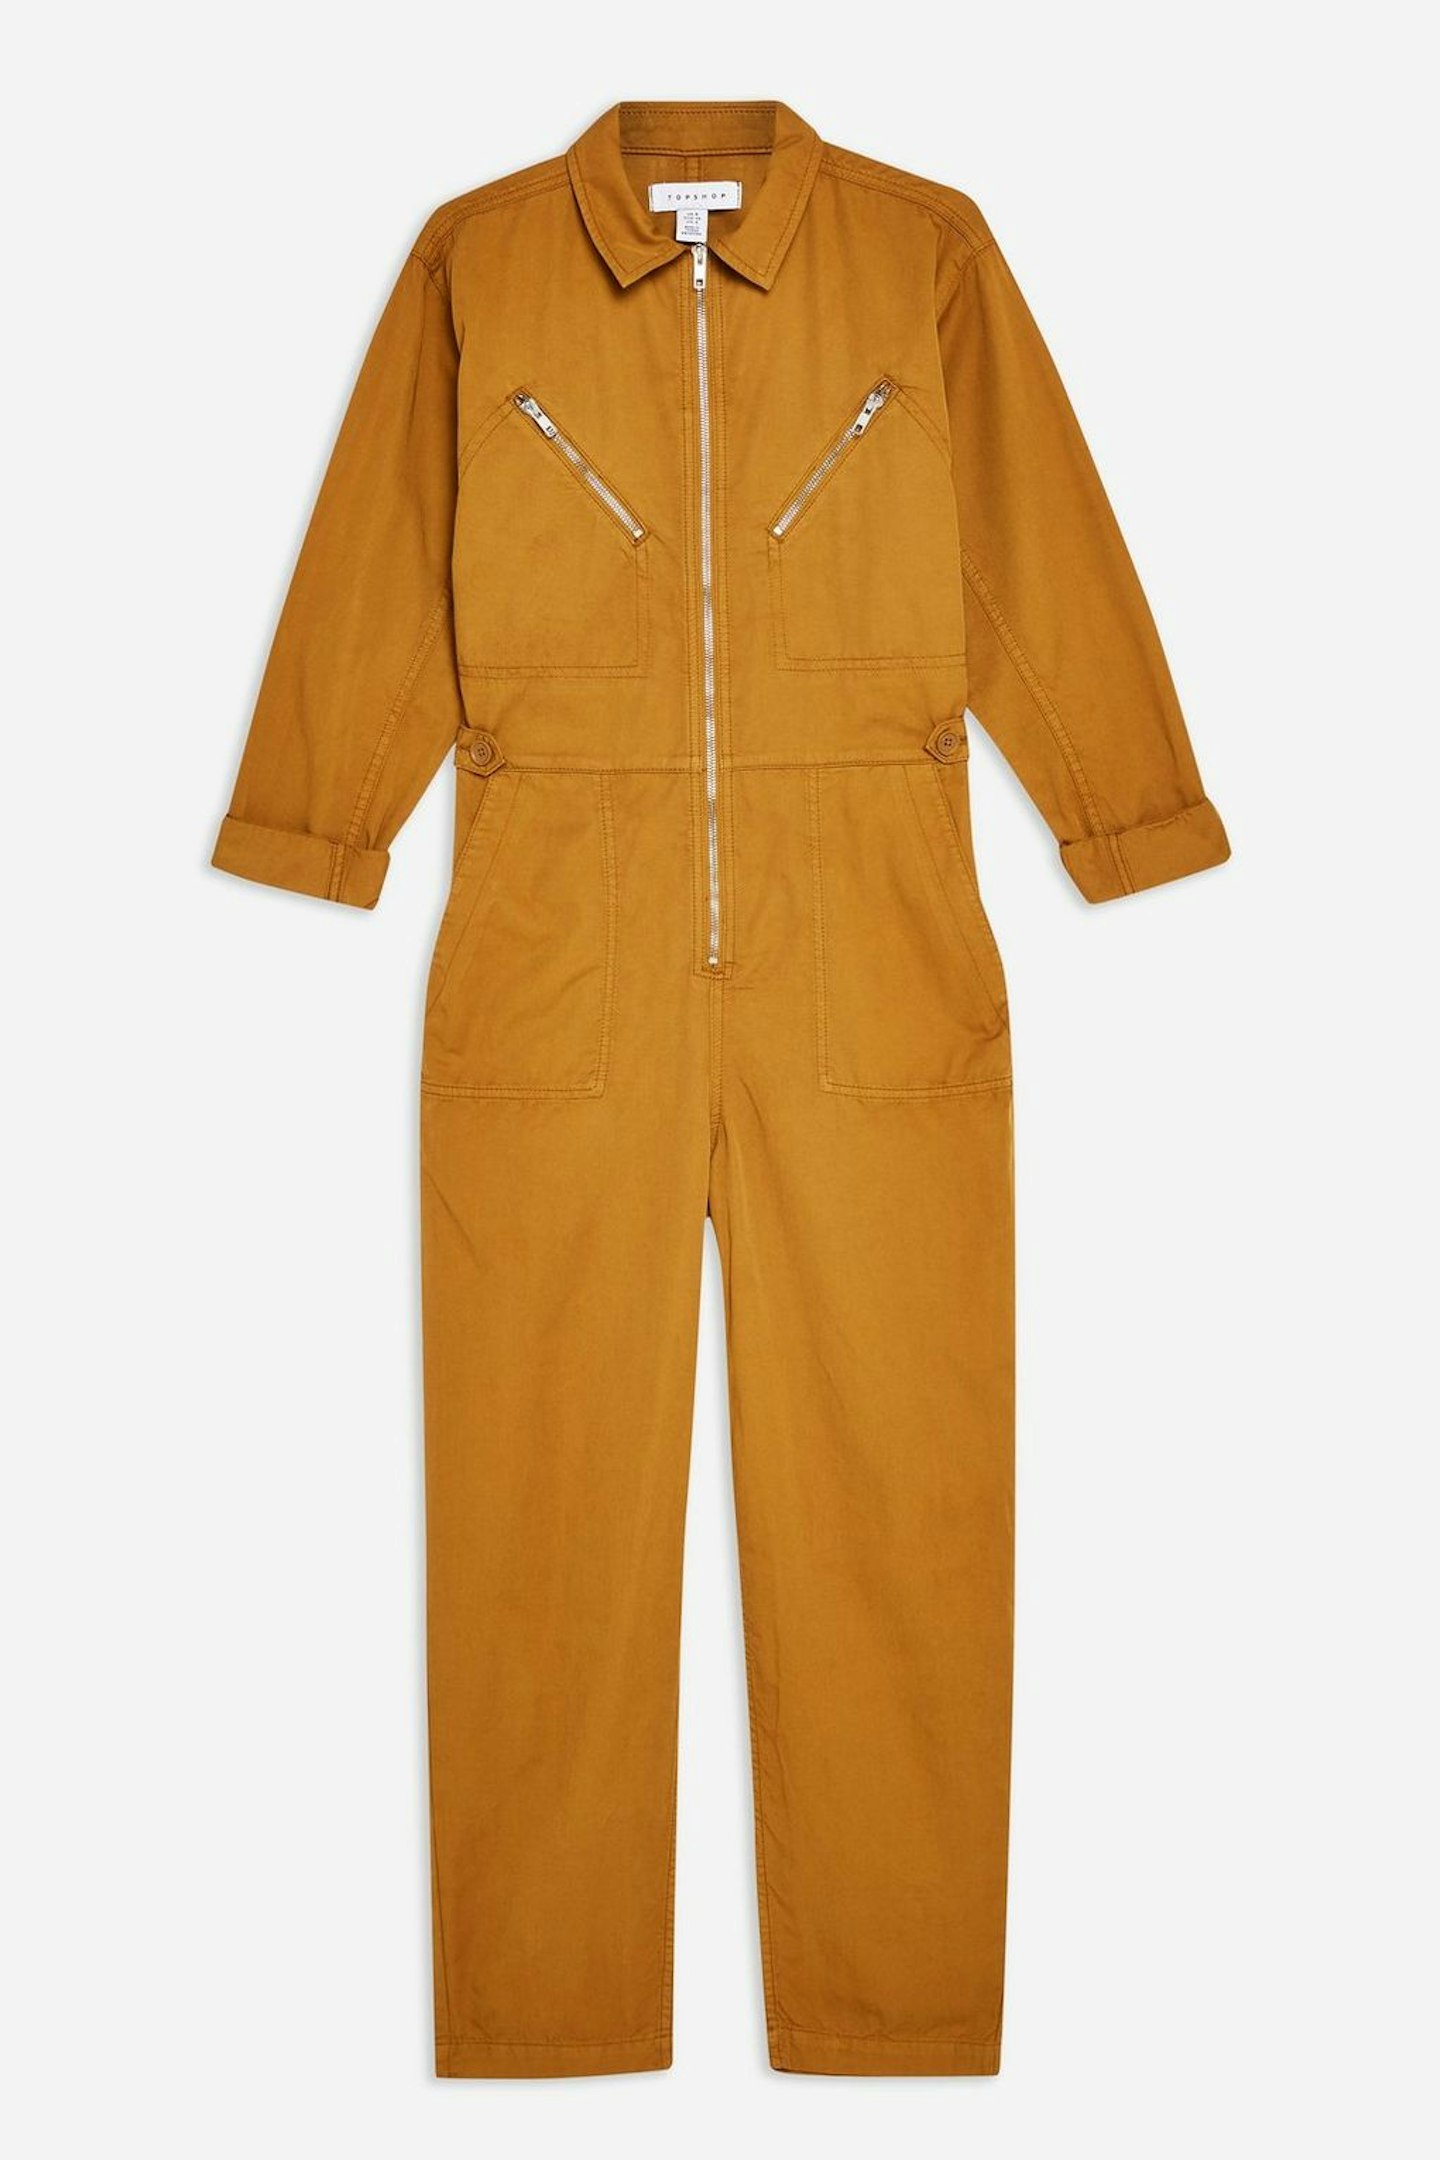 The Boiler Suit's Here To Stay